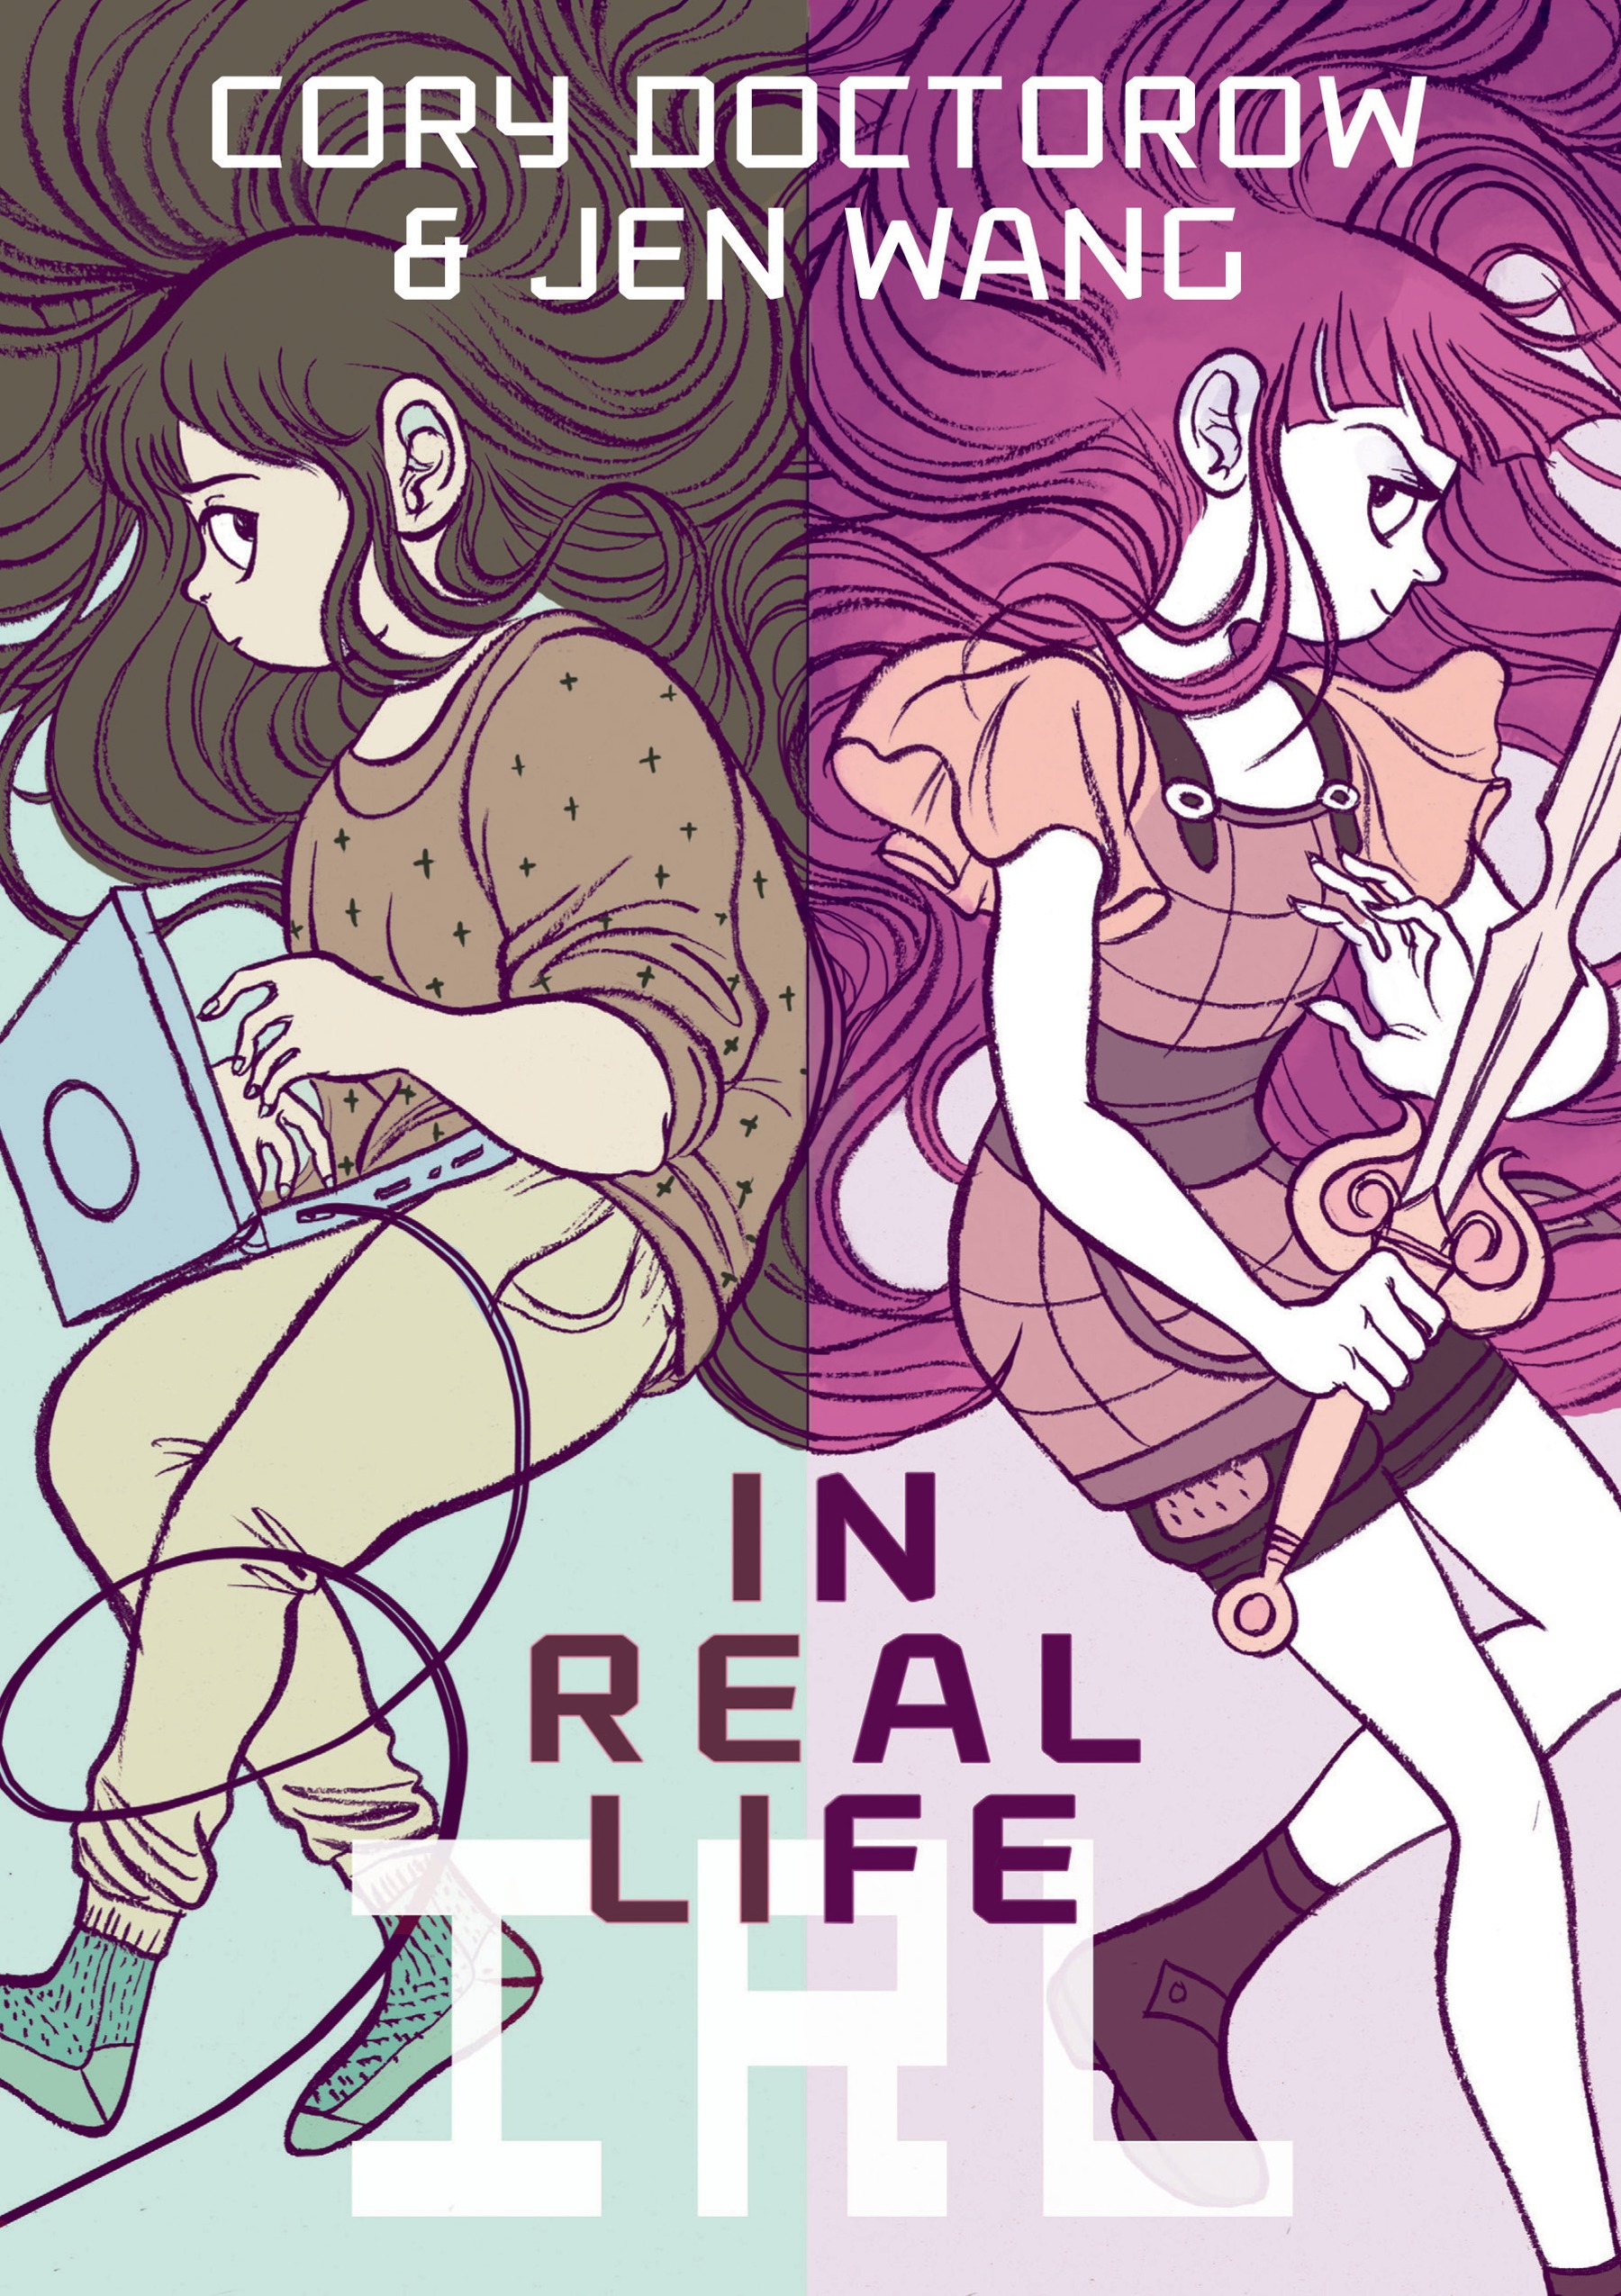 Book “In Real Life” by Cory Doctorow — February 13, 2018